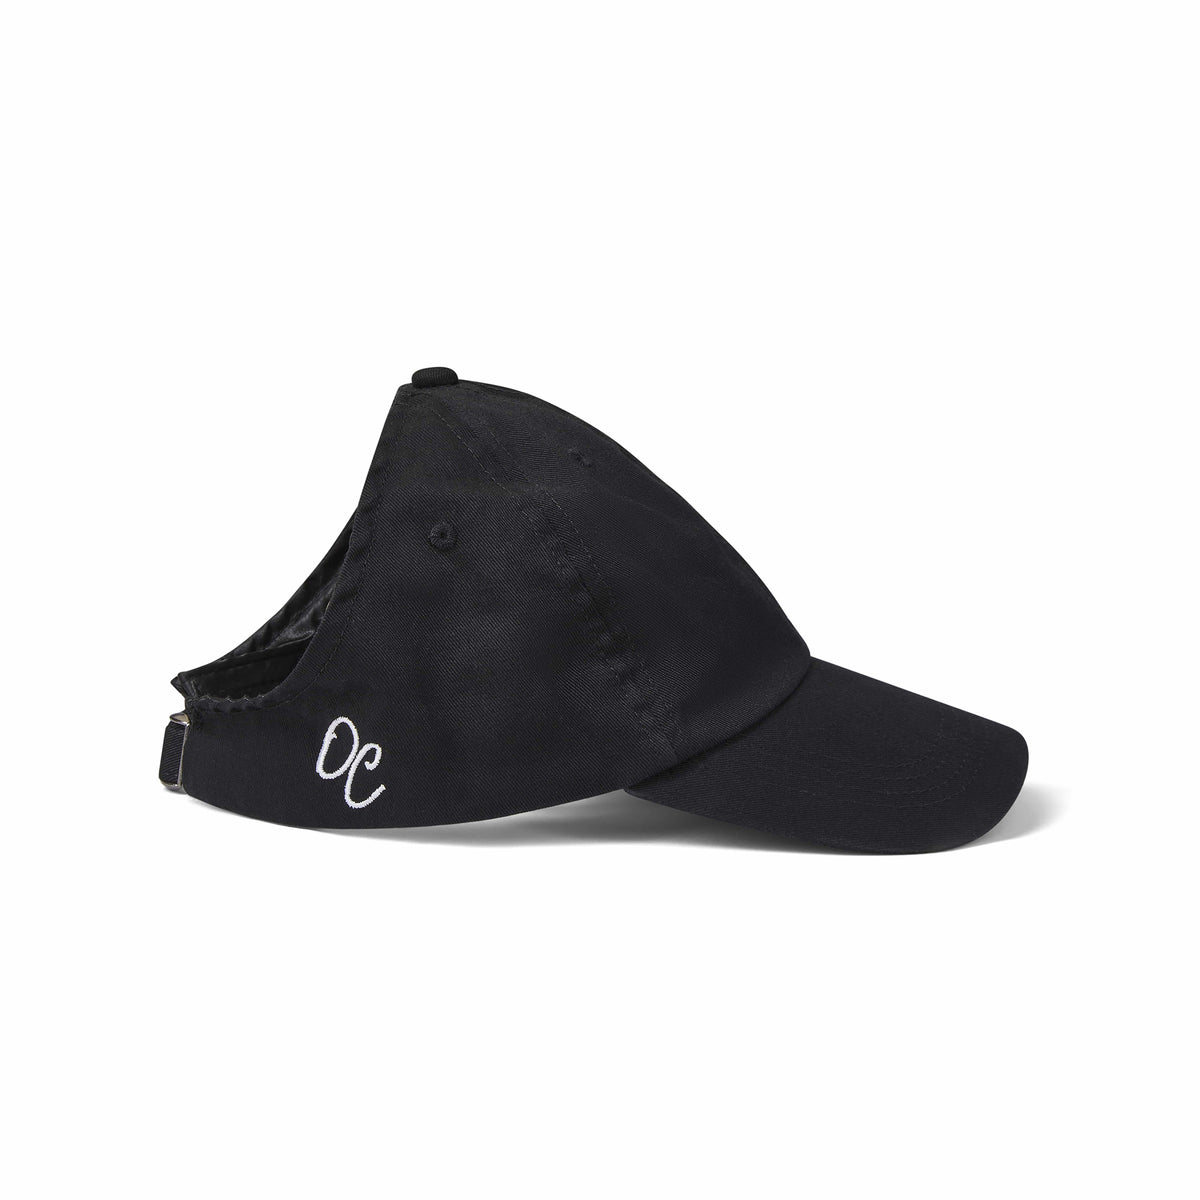 Only Curls Satin Lined Baseball Hat (with open back) - Jet Black - Only Curls